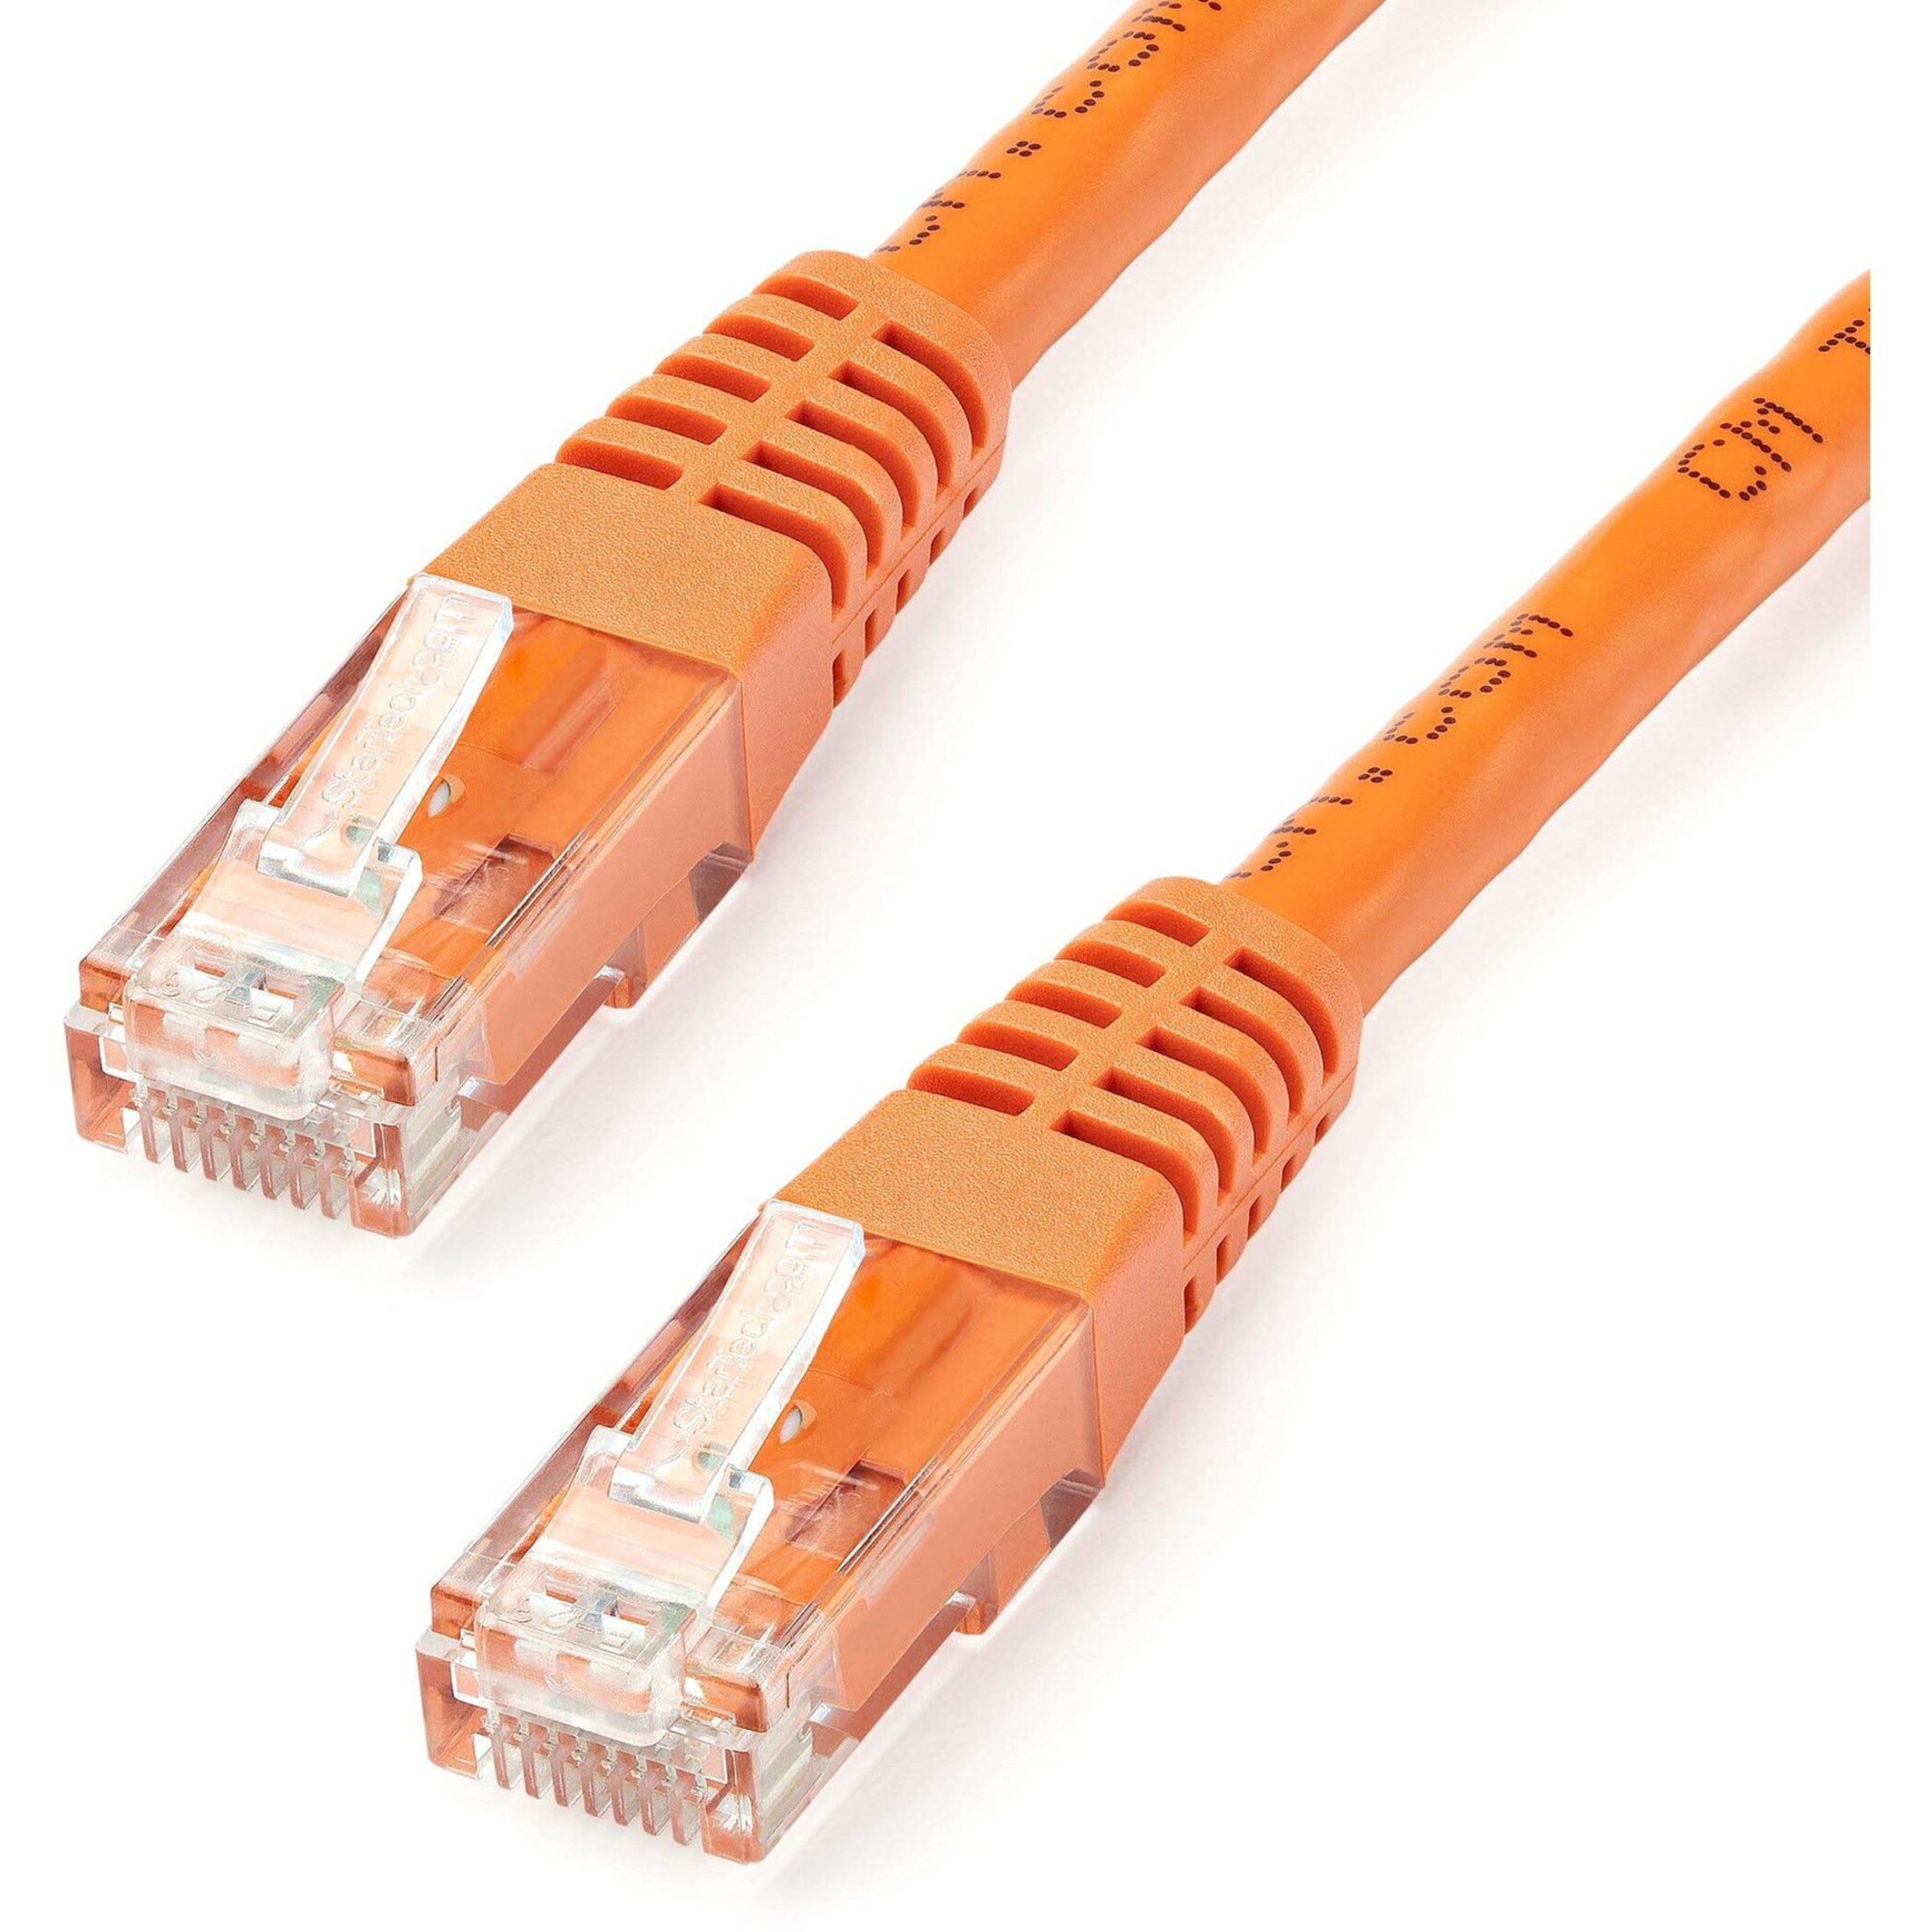 Startech .com 15ft CAT6 Ethernet CableOrange Molded Gigabit100W PoE UTP 650MHzCategory 6 Patch Cord UL Certified Wiring/TIA15ft O… C6PATCH15OR